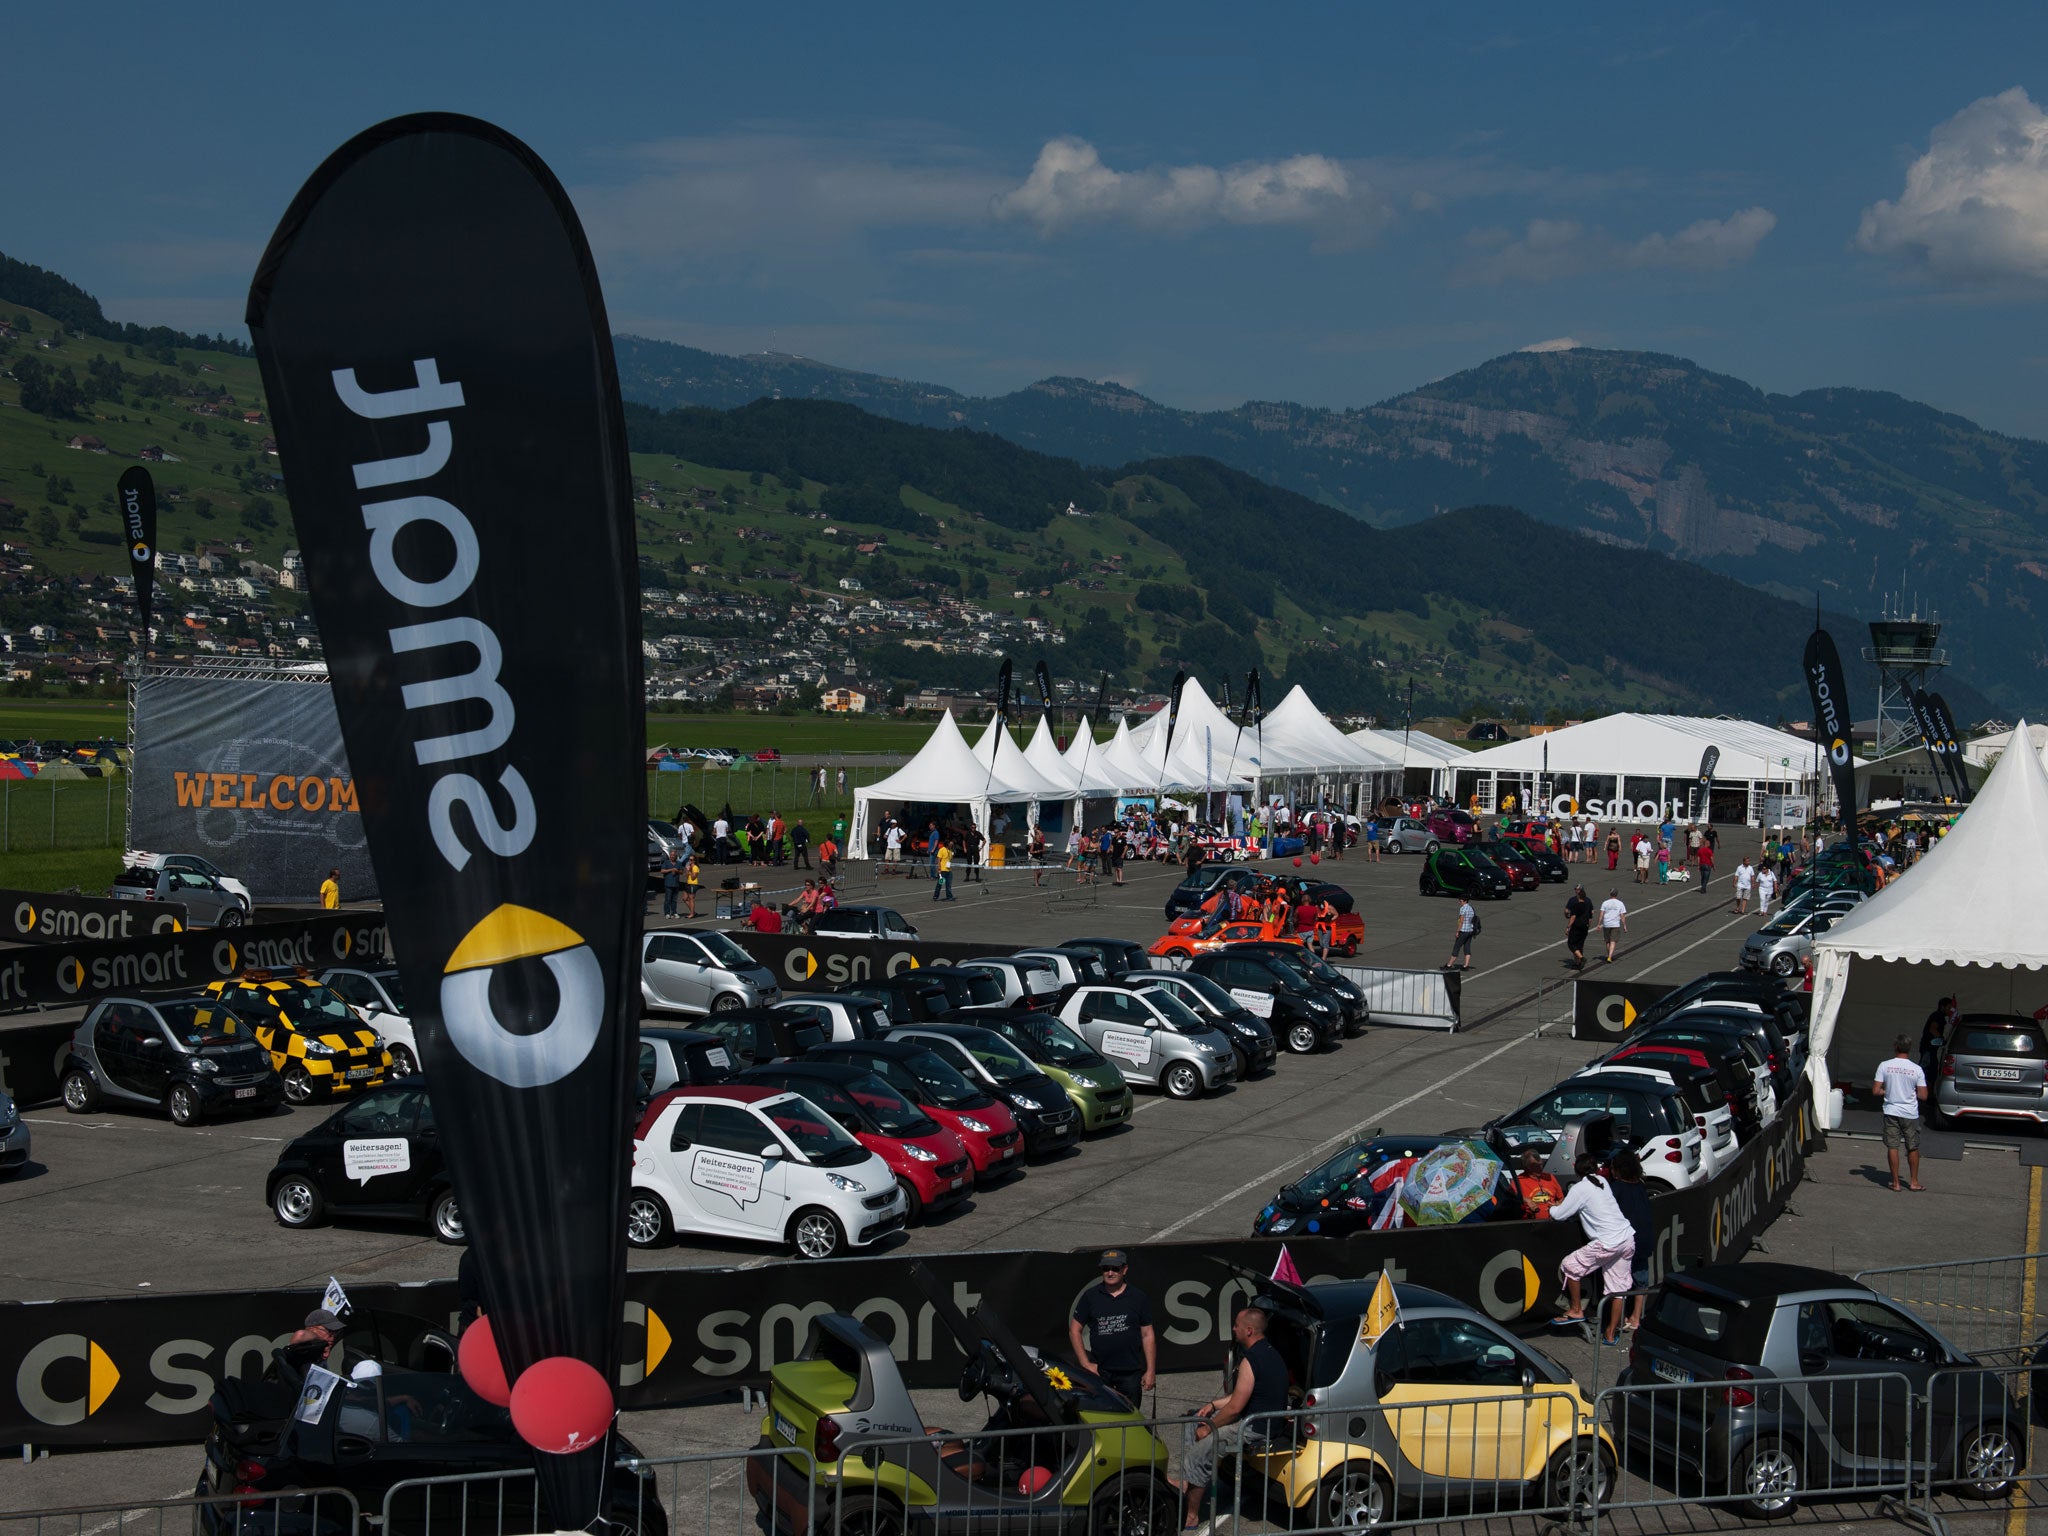 Our friend’s electric: The ‘smart times 13’ convention, at Buochs airport in Switzerland